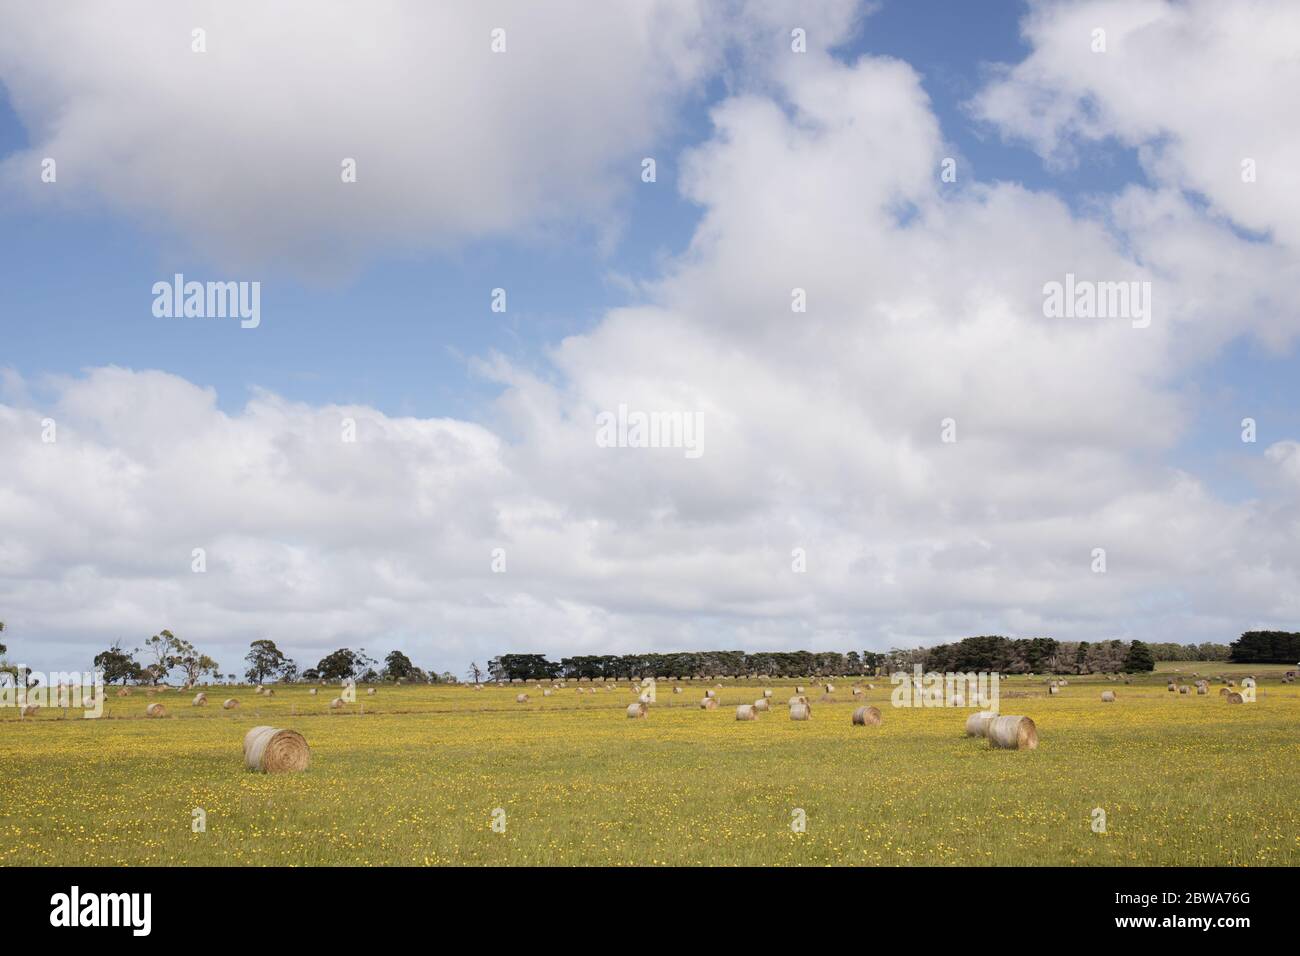 a farm with yellow flowers with round hay bales, trees in back ground. Image taken in Victoria Australia. Stock Photo